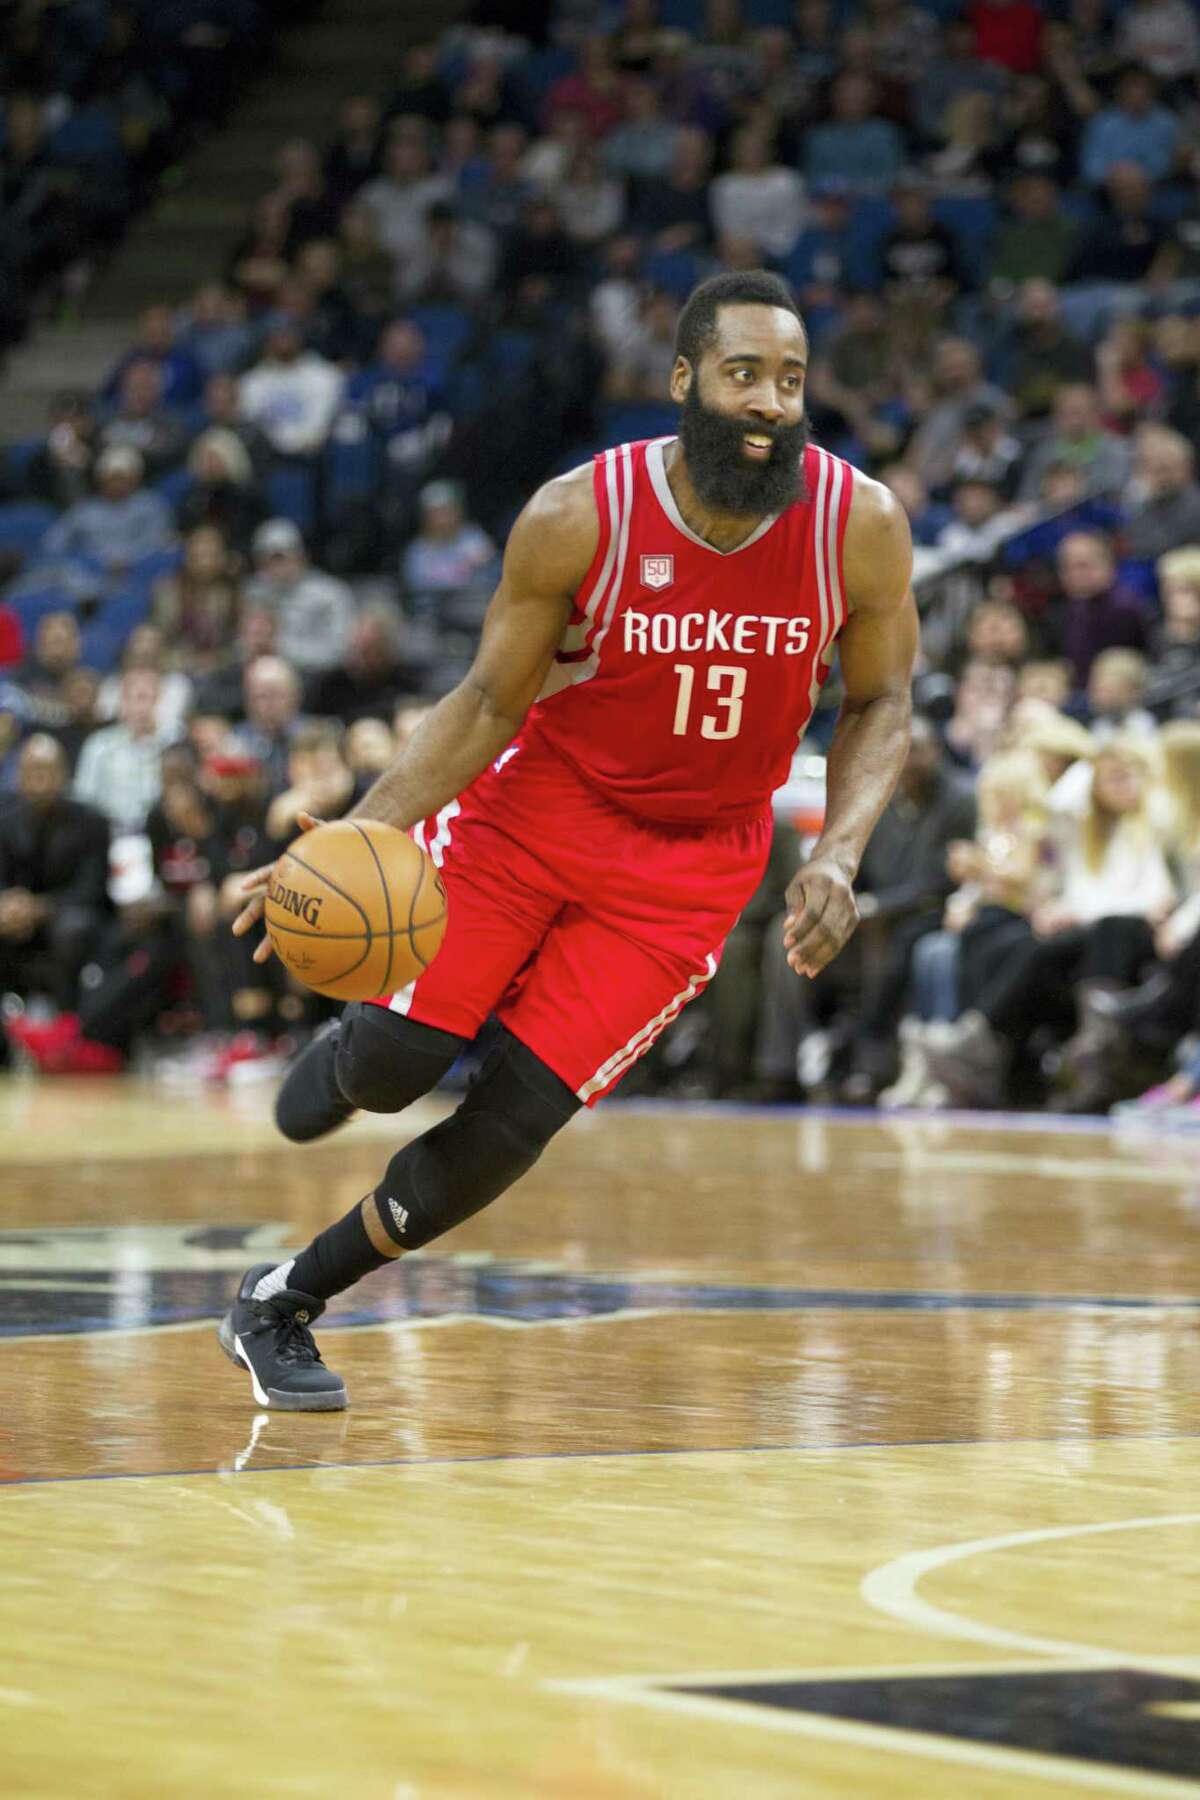 Houston Rockets guard James Harden (13) plays against Minnesota during an NBA basketball game on Saturday, Dec. 17, 2016 in Minneapolis.